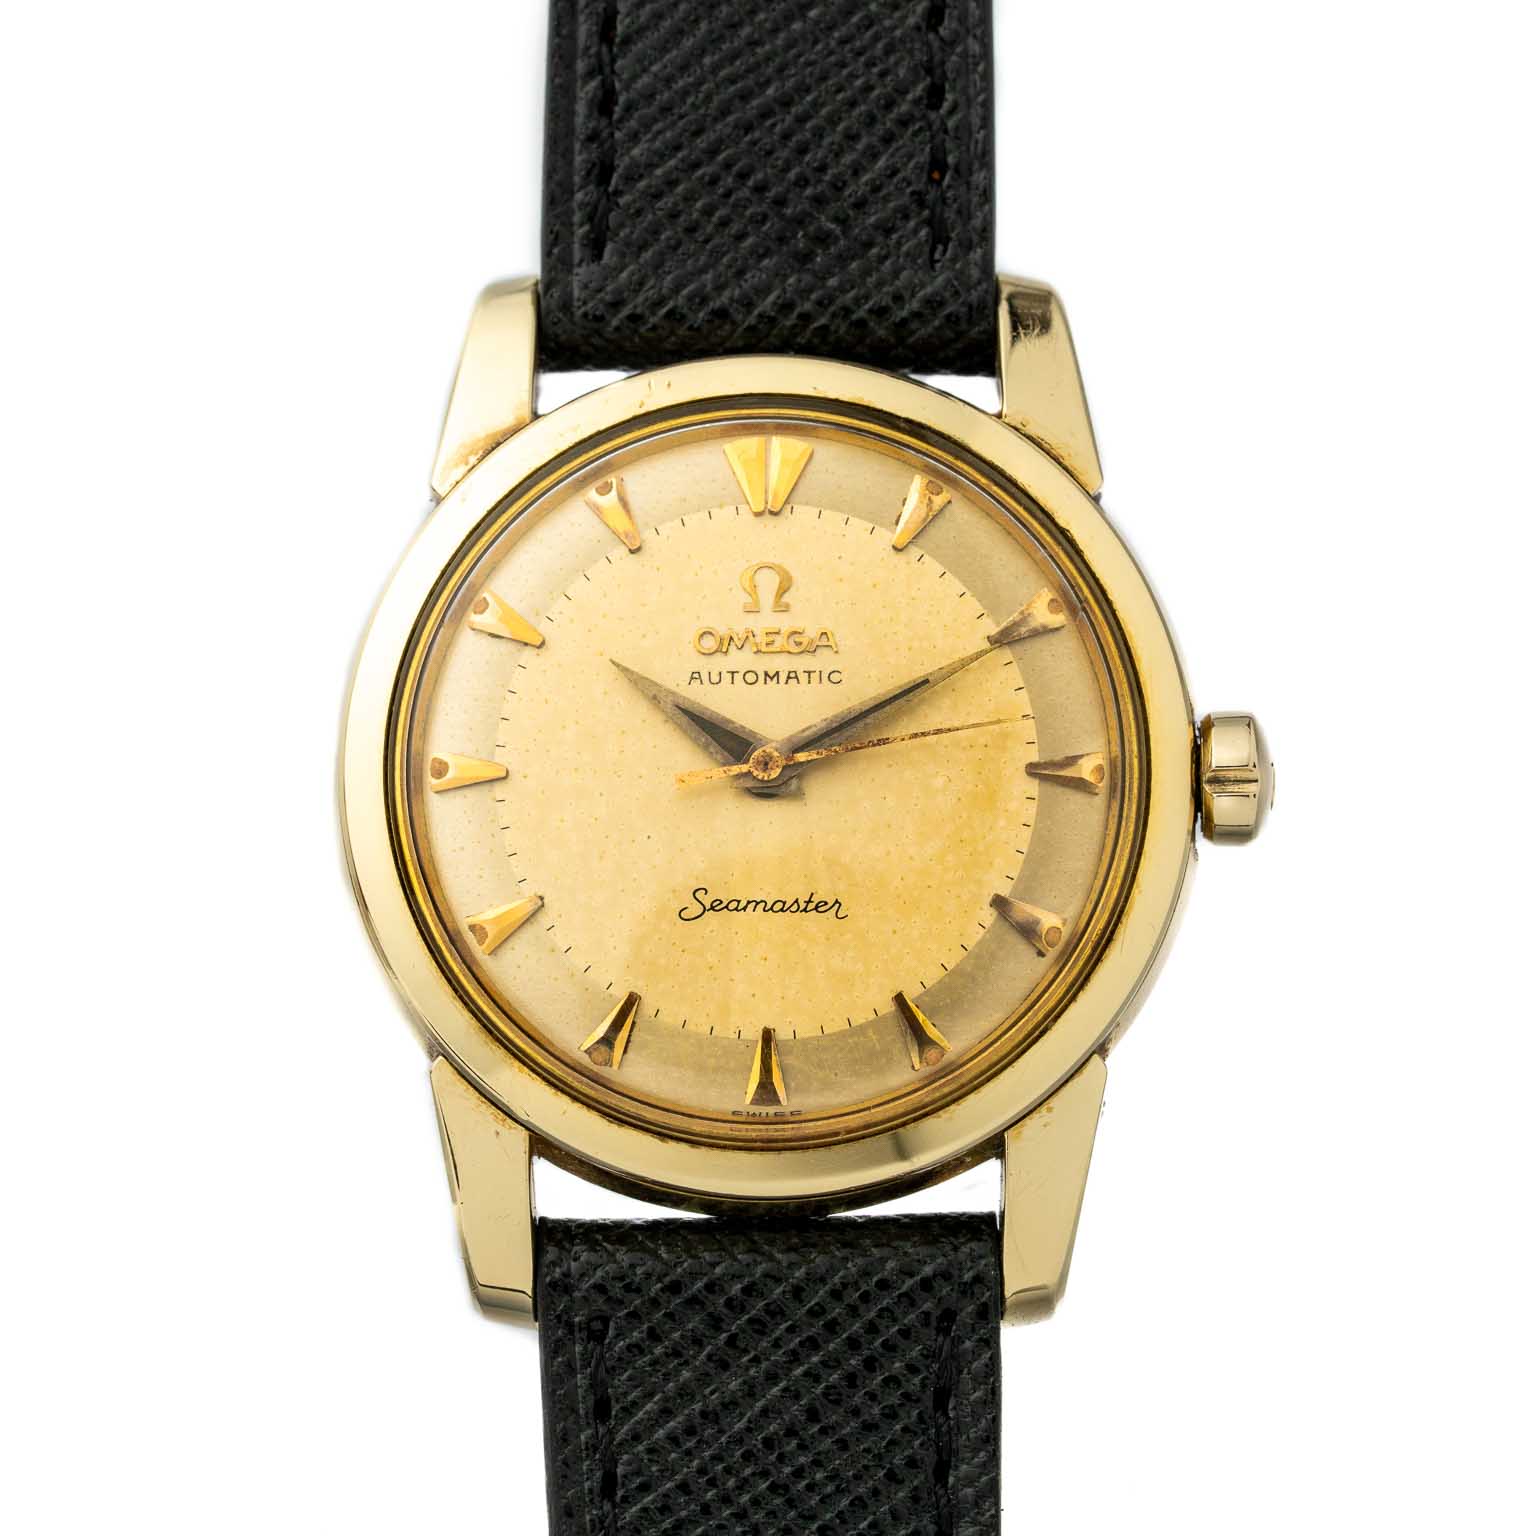 Vintage Omega Seamaster with beefy lugs gold capped 2846-10SC from 1966 watch front